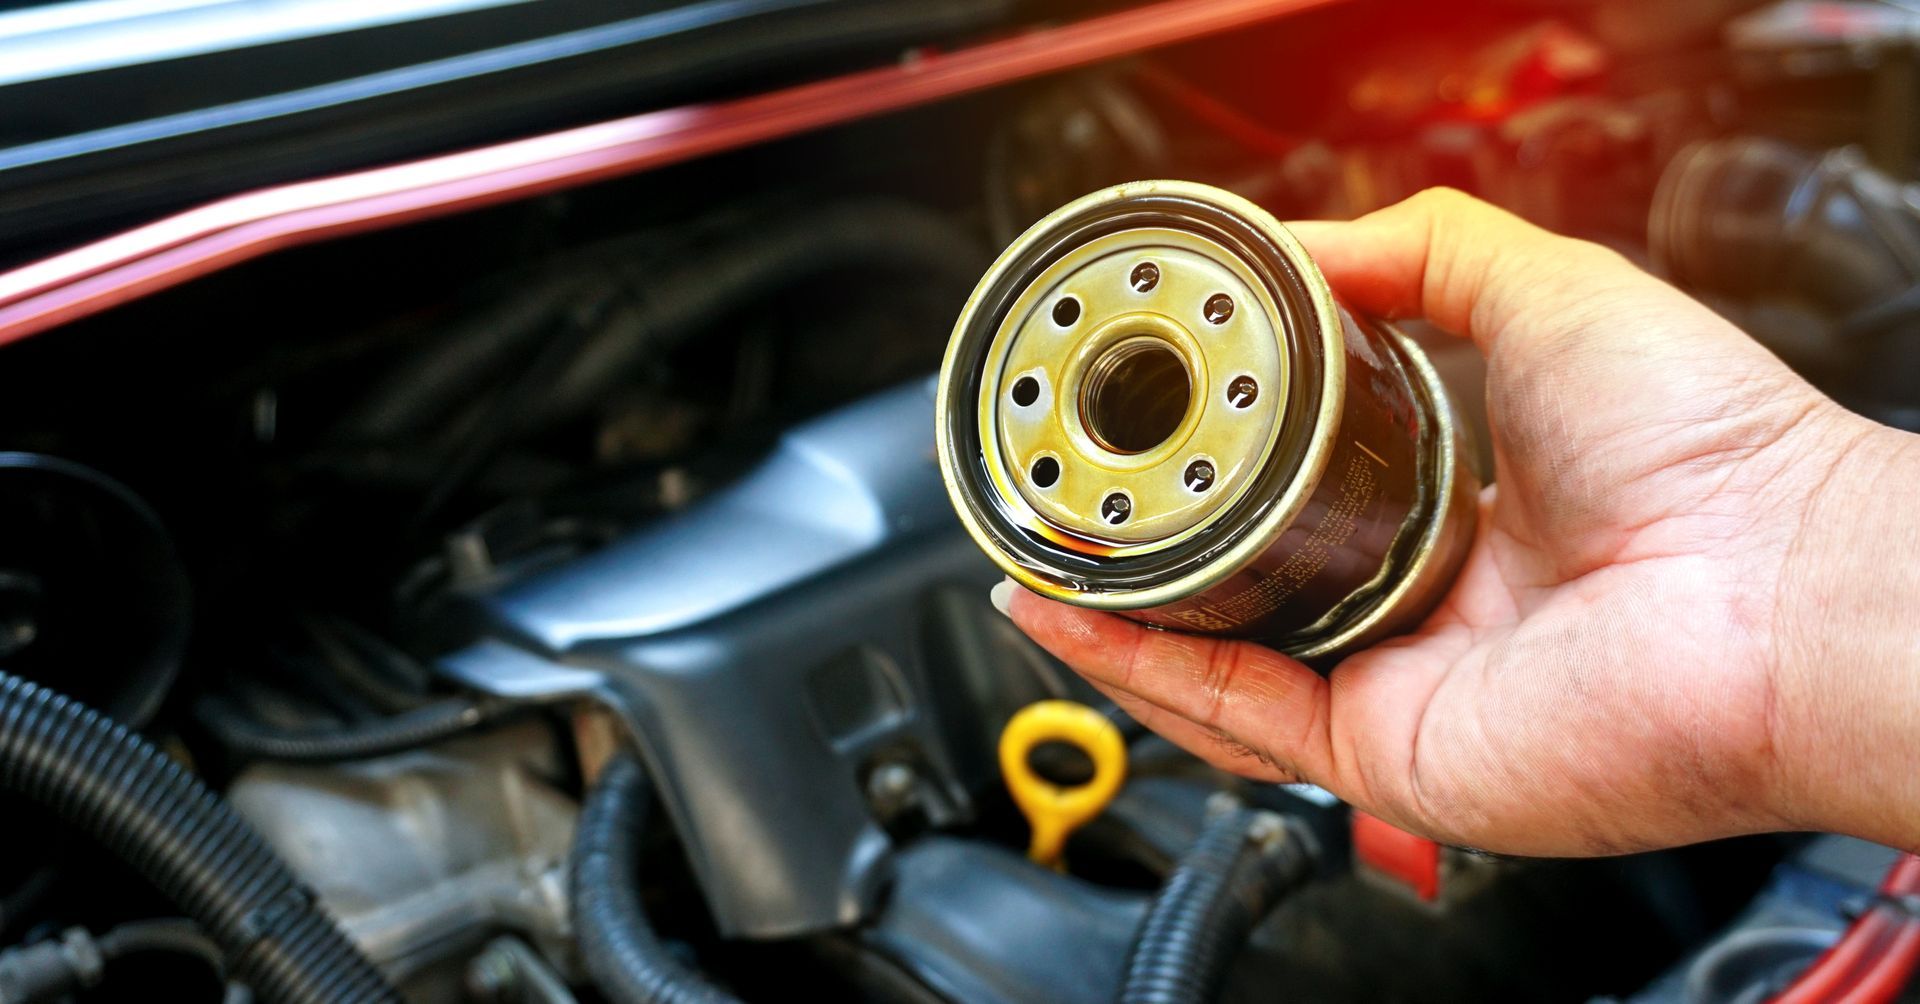 Do Fuel Filters Need To be Changed? | Aegis Auto Services
